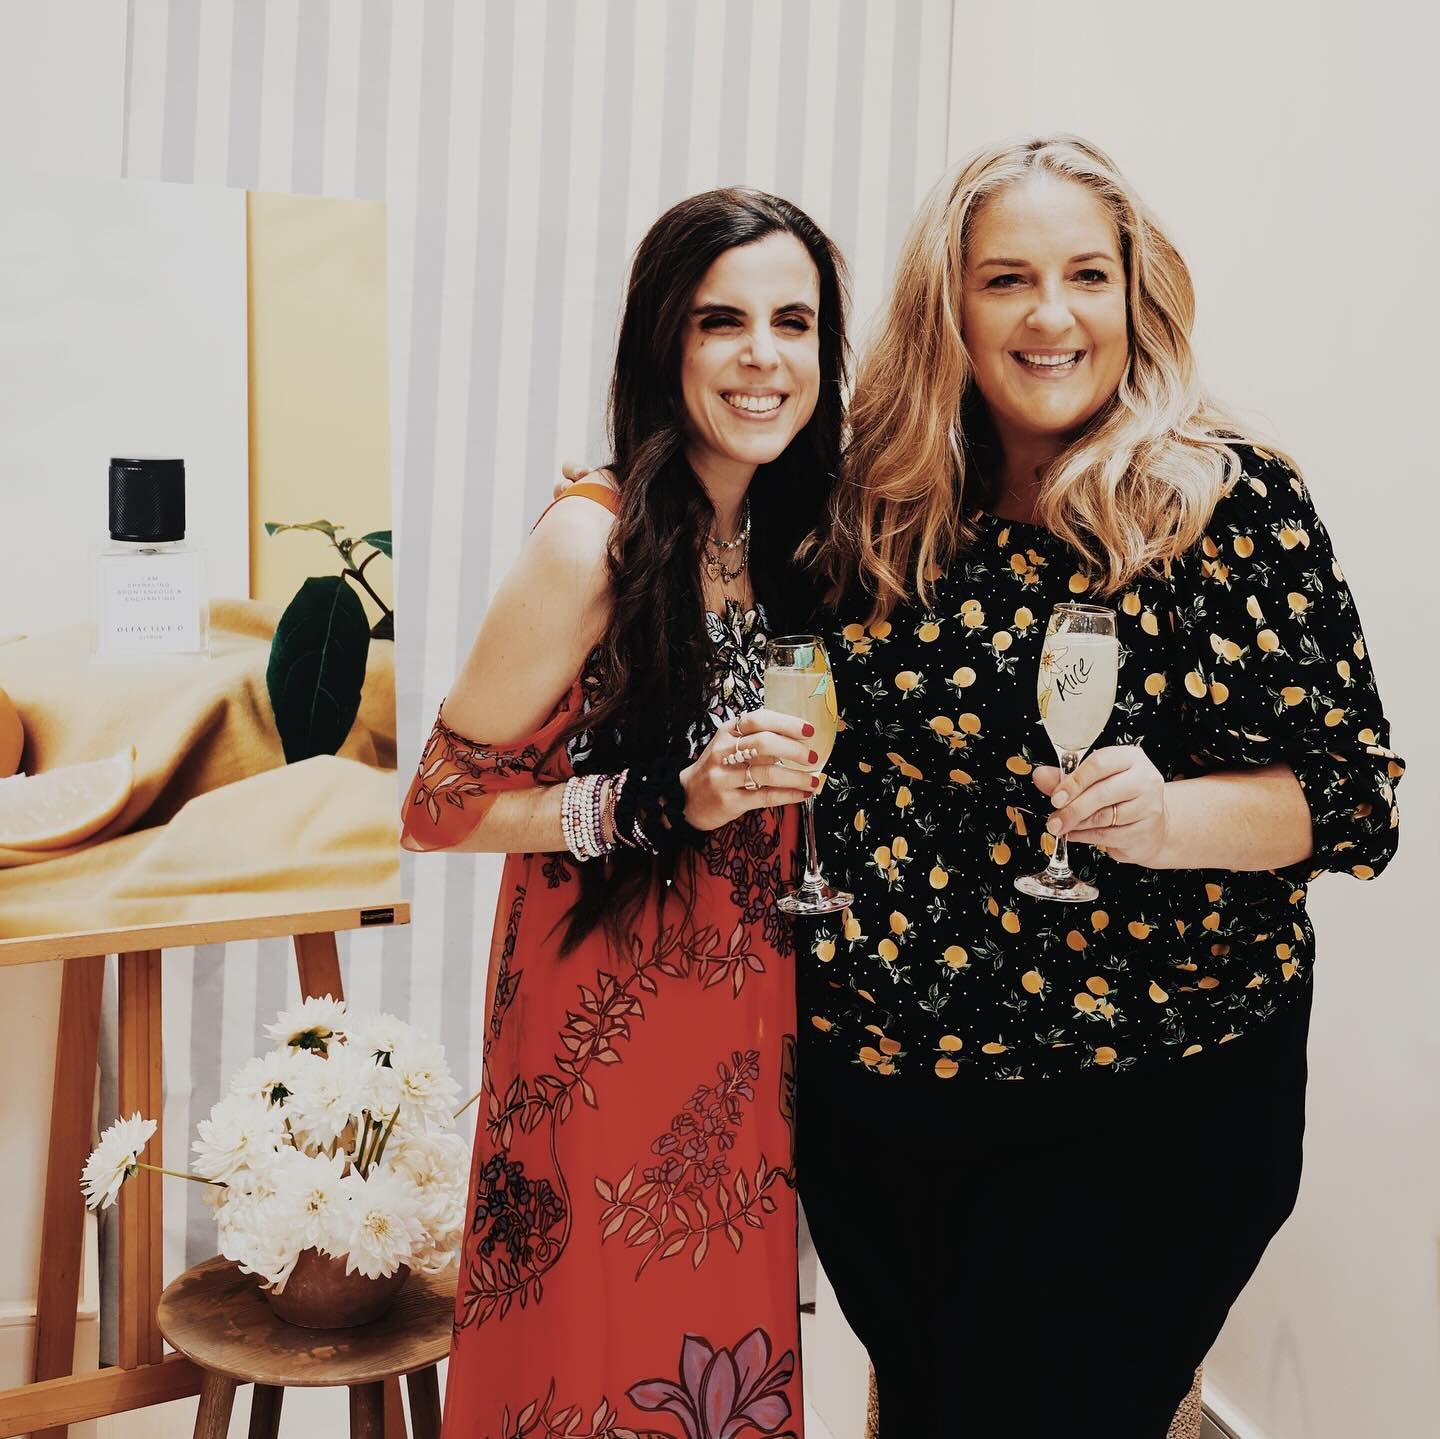 With @fragrancefoundationuk awards tonight, I&rsquo;ve been thinking back to the launch party for our sparkling, 3x awards finalist - Citrus. I&rsquo;d defo temporarily lost my marbles when I said &lsquo;hey, let&rsquo;s host the launch at home!&rsqu